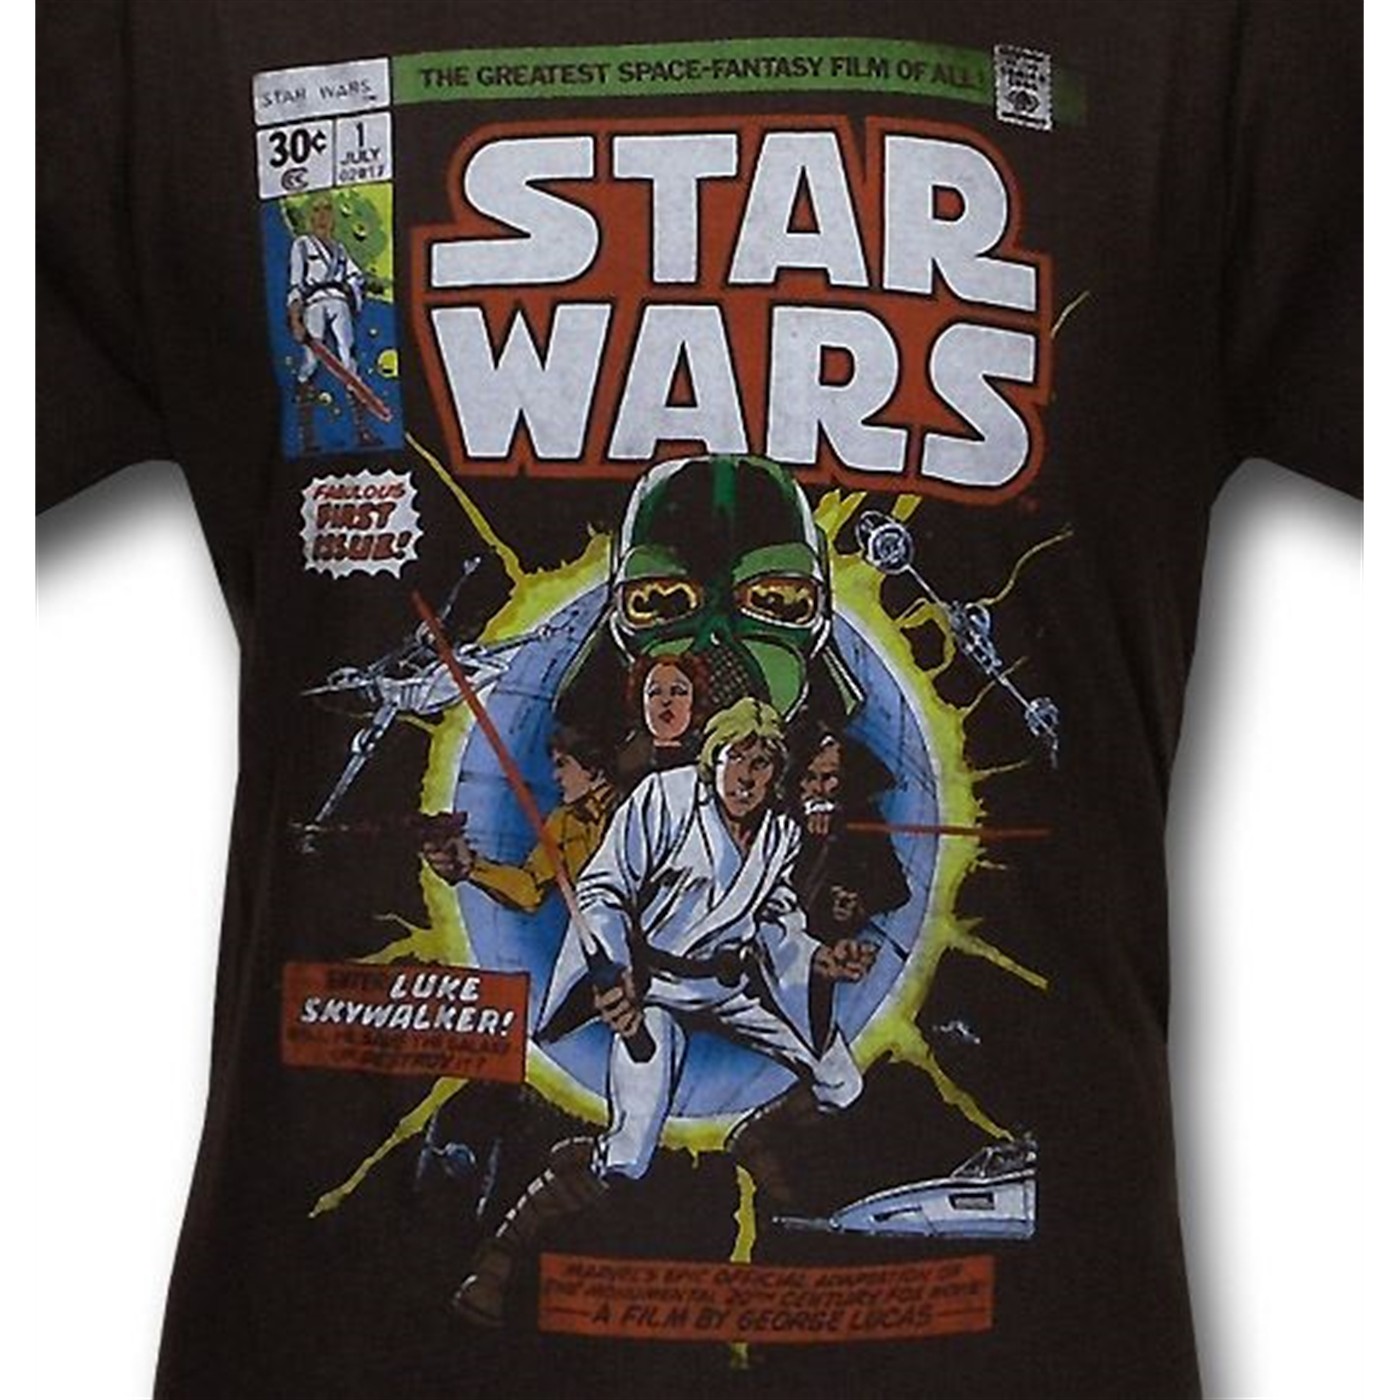 Star Wars Issue #1 Comic Cover 30 Single T-Shirt